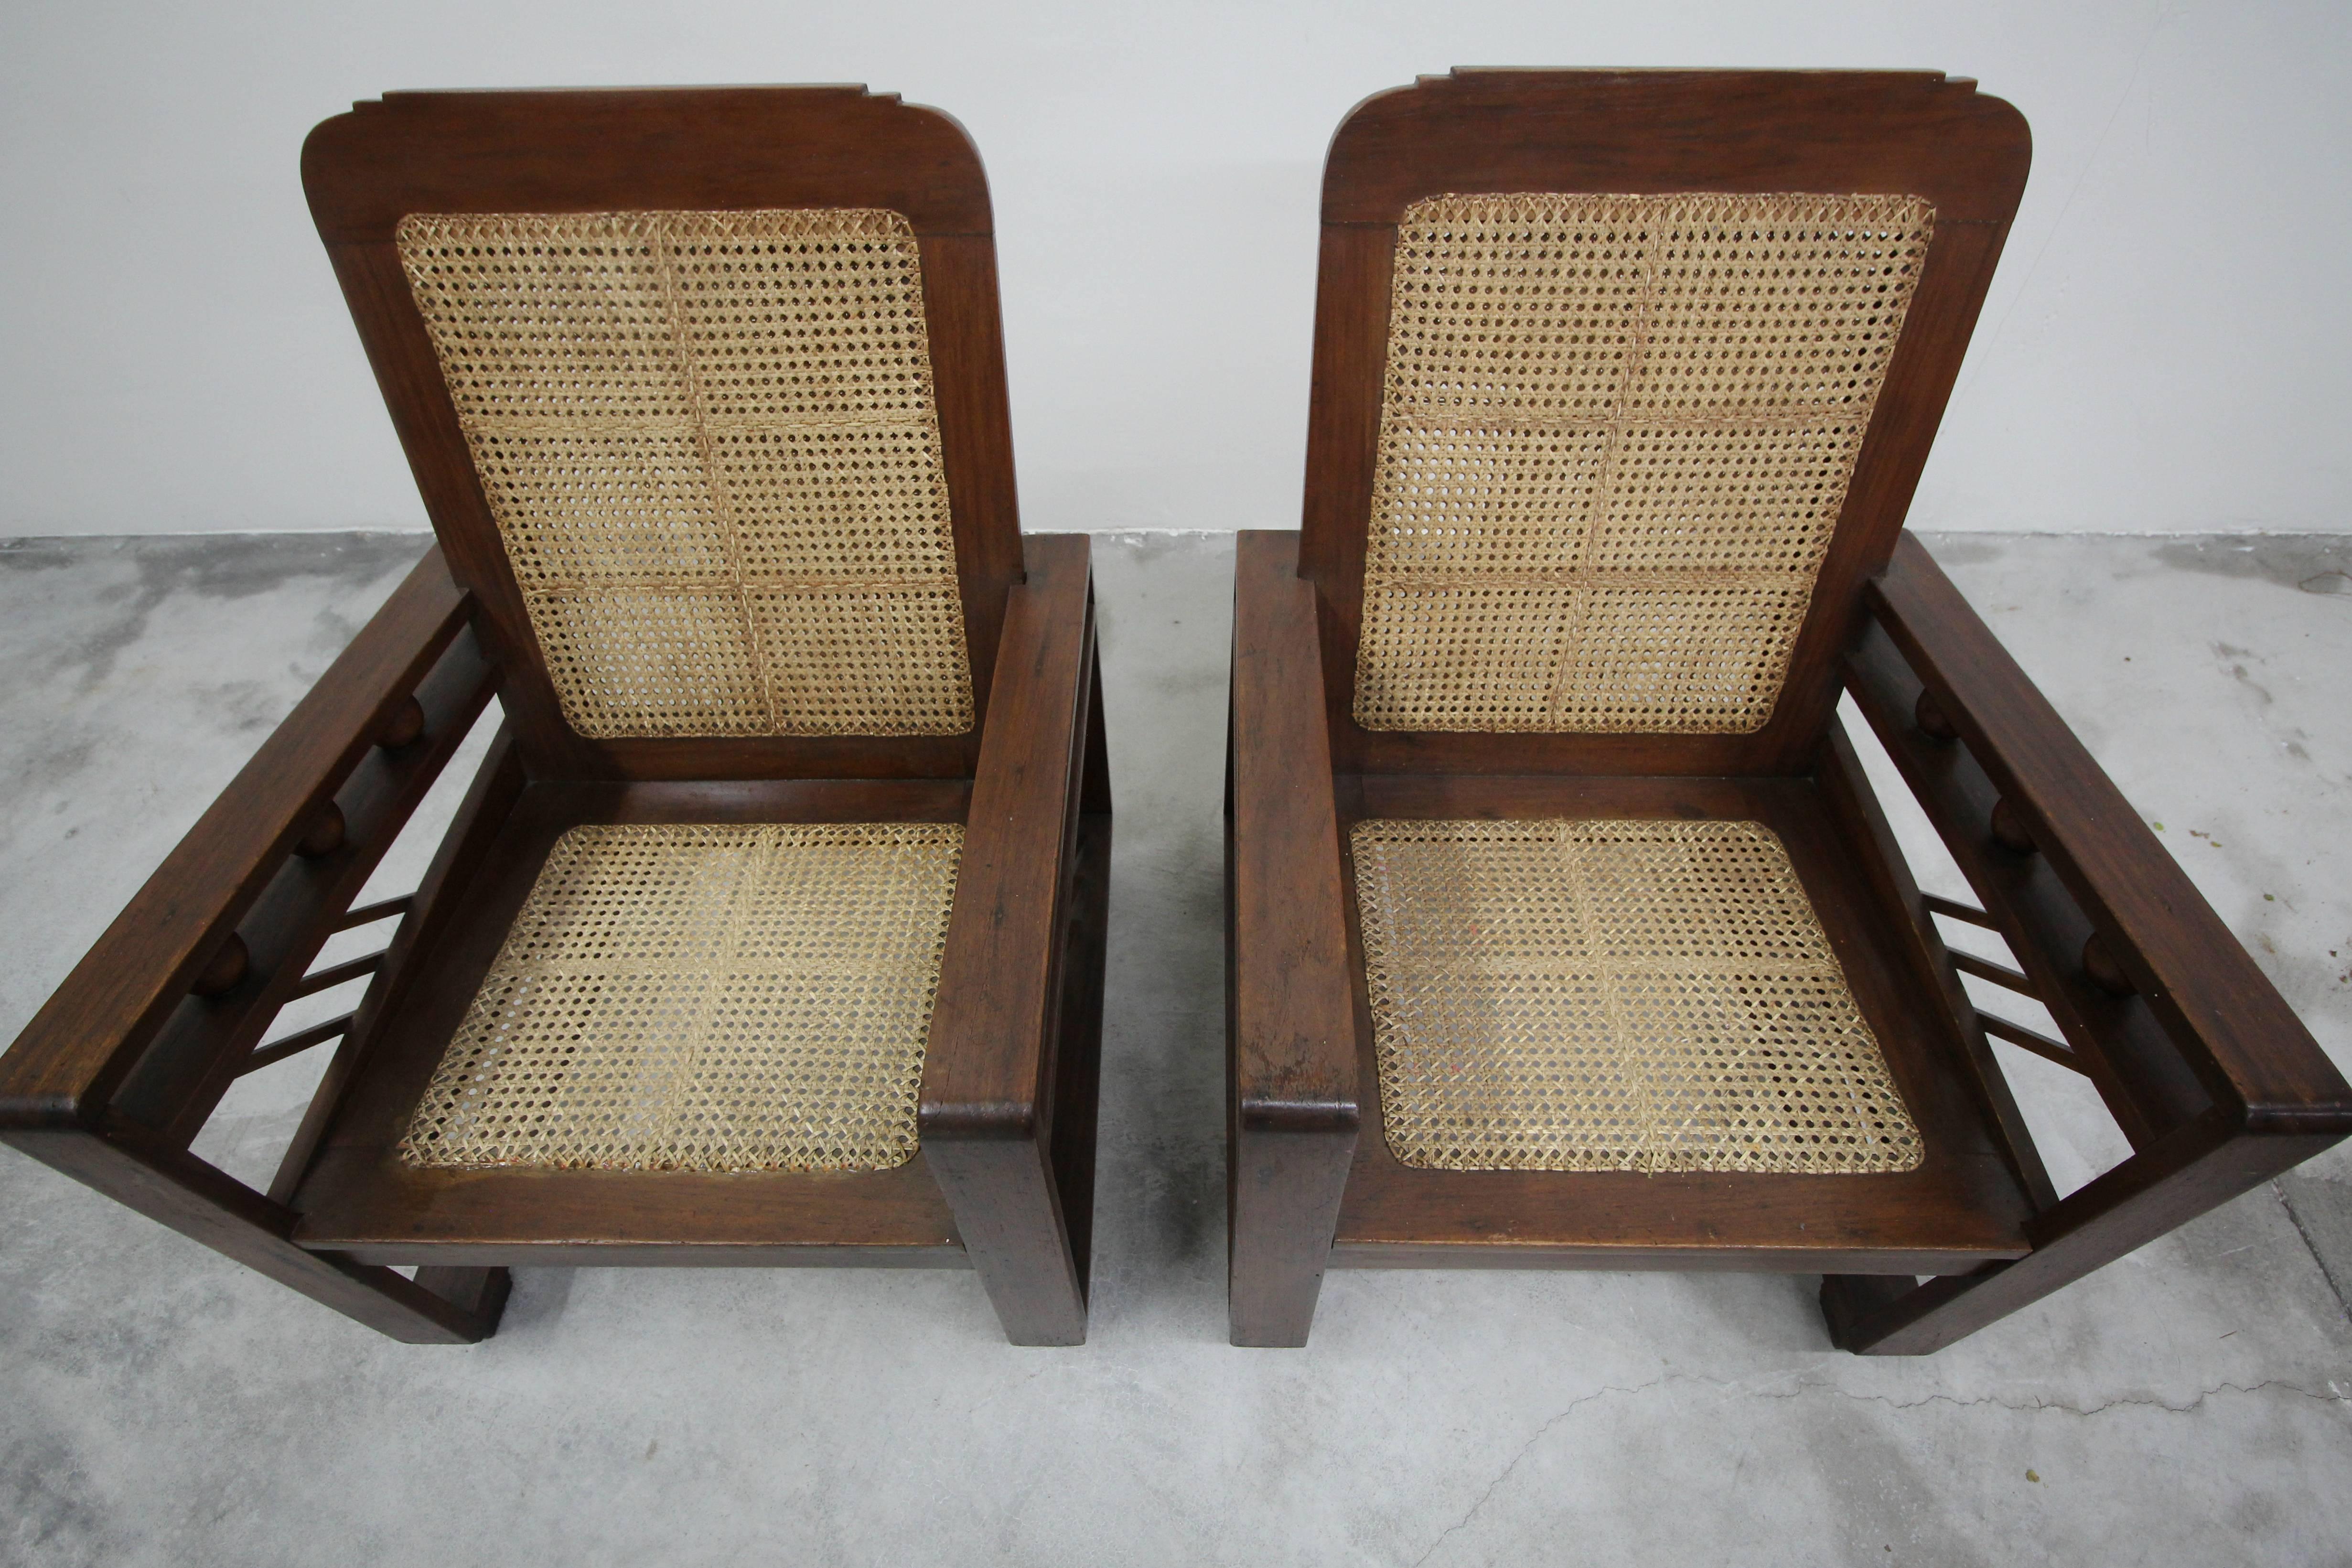 Pair of Antique French Art Deco Solid Wood Lounge Chairs with Cane Backs & Seats 4